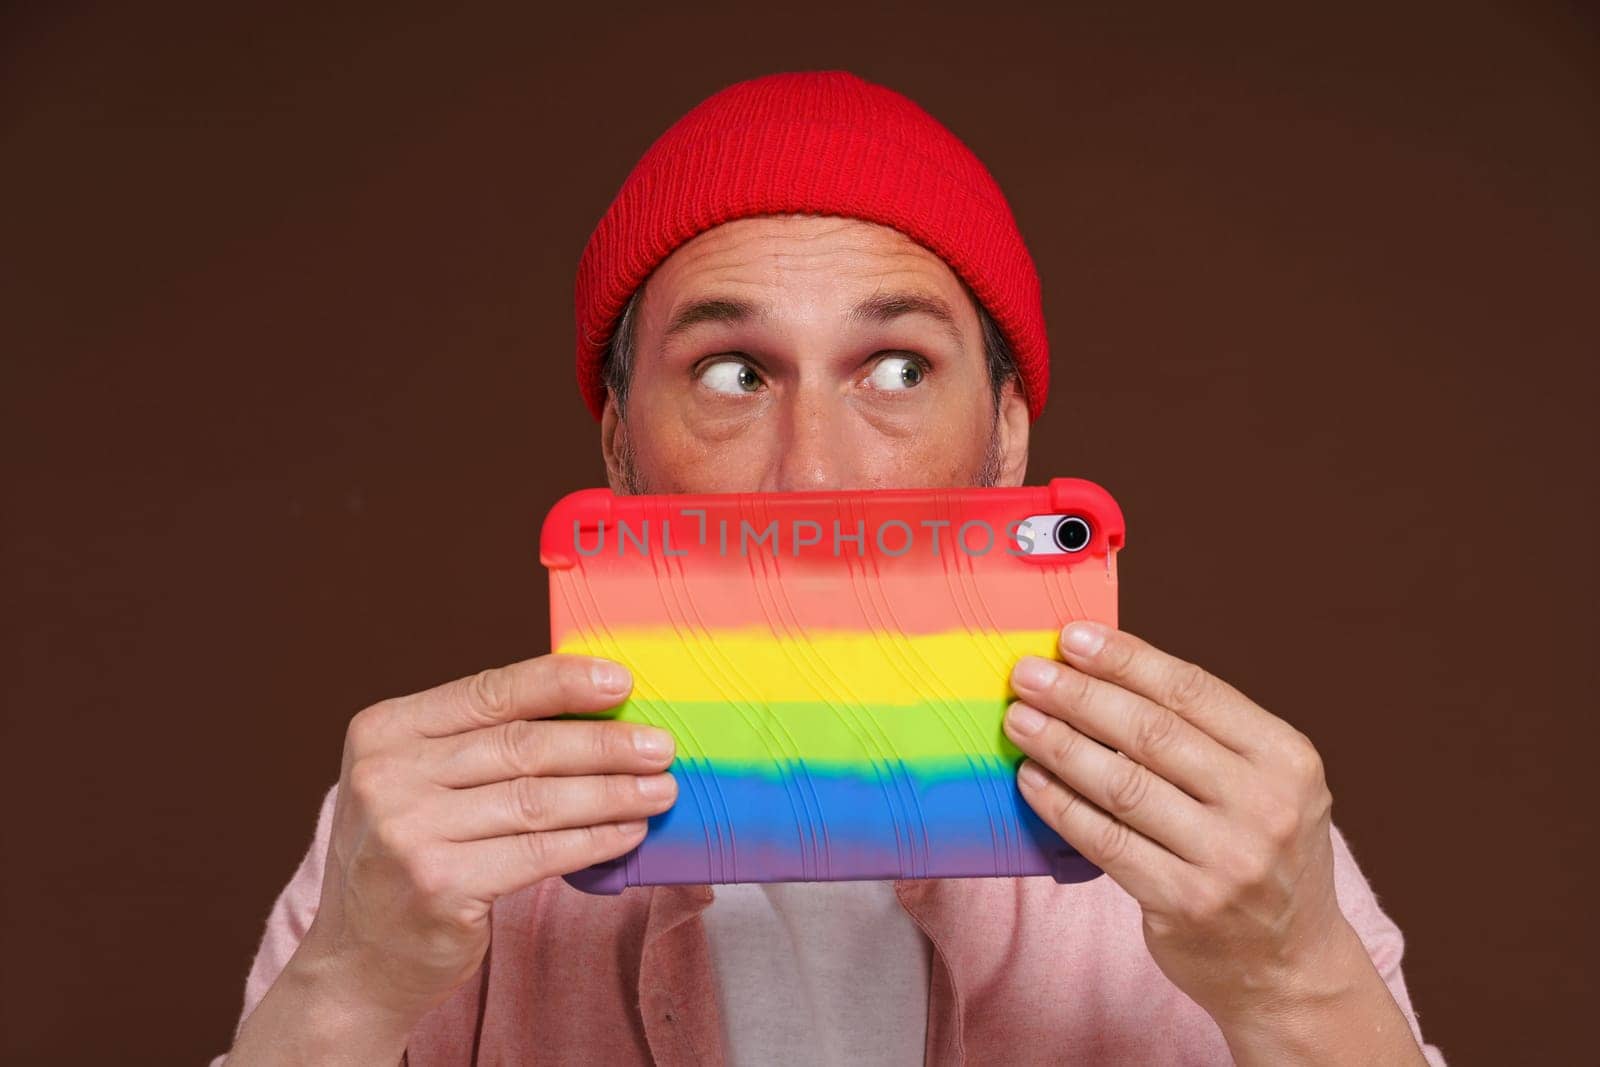 Gay man depicted feeling ashamed sexual orientation online, looking out with fear over tablet LGBT coloring. man in digital world represents negative emotions associated with secrecy and hidden personal identity. by LipikStockMedia